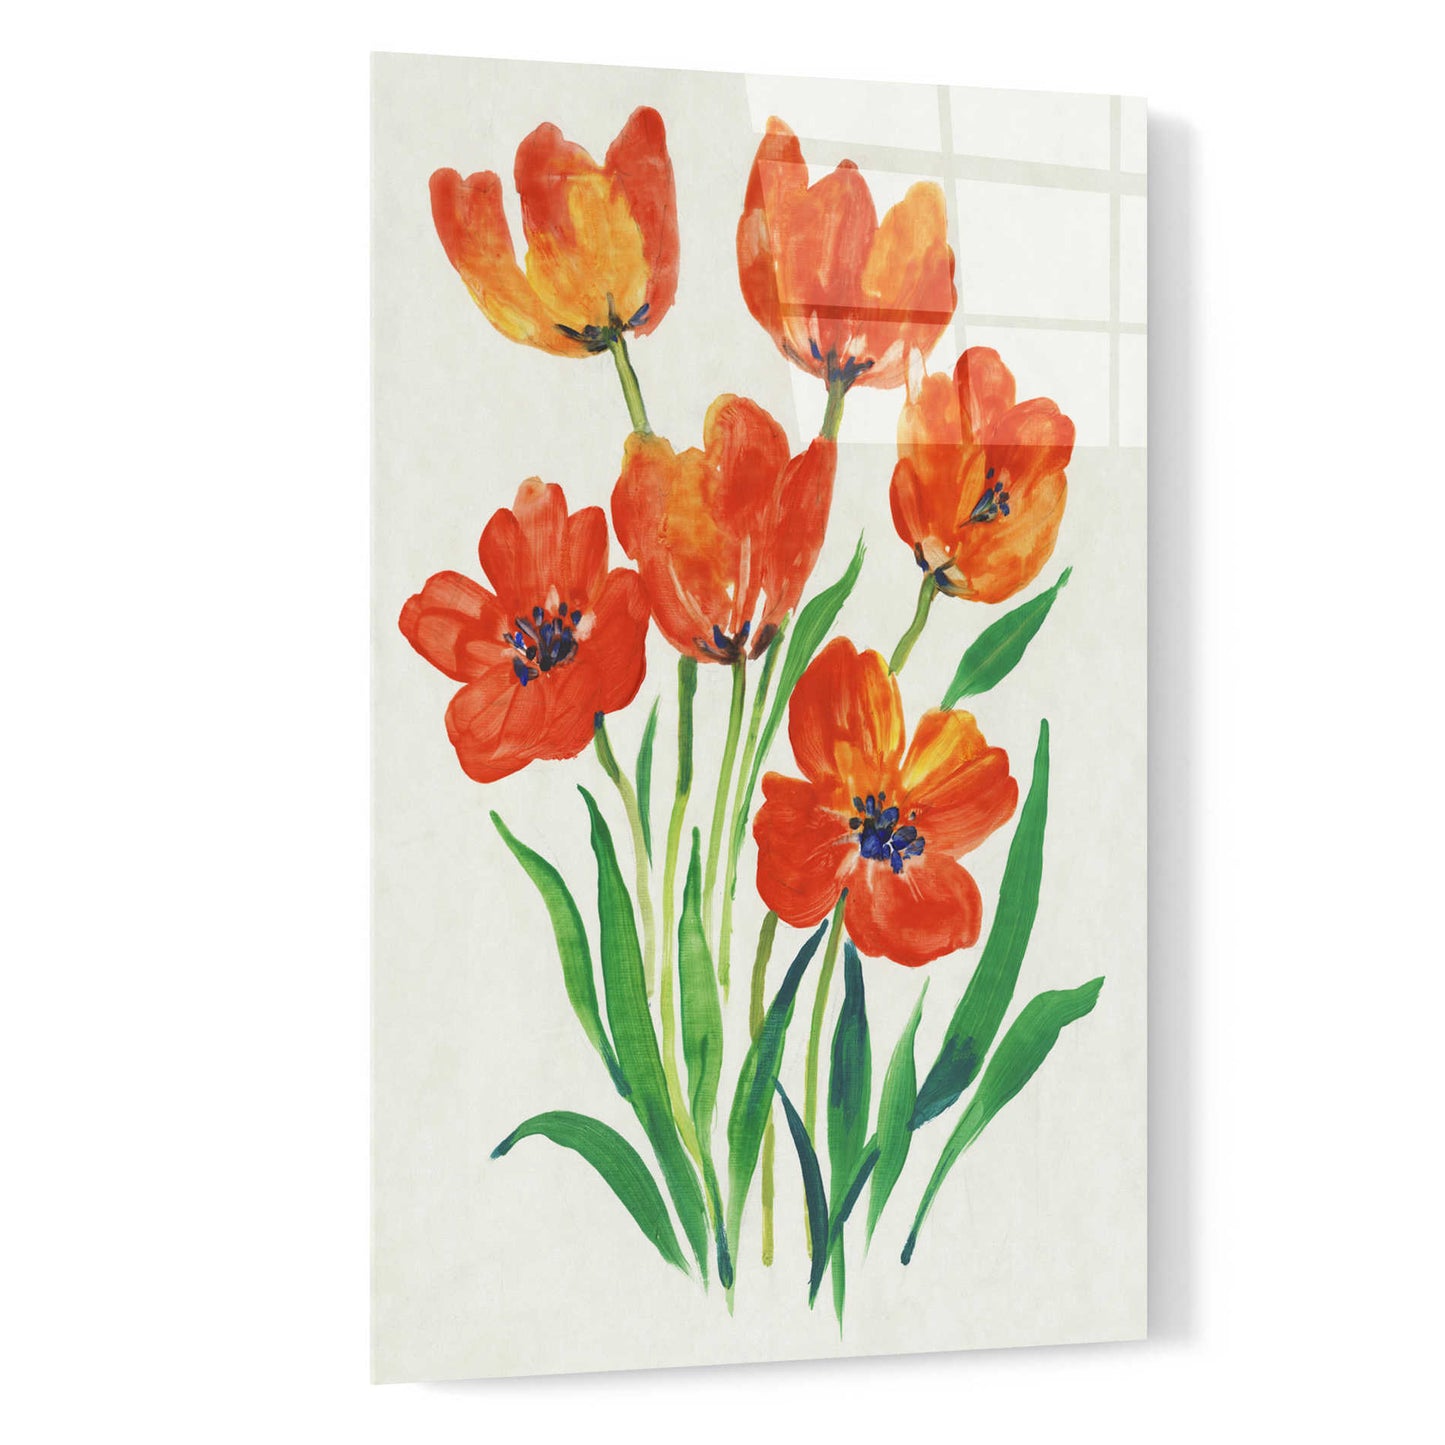 Epic Art 'Red Tulips in Bloom II' by Tim O'Toole, Acrylic Glass Wall Art,16x24